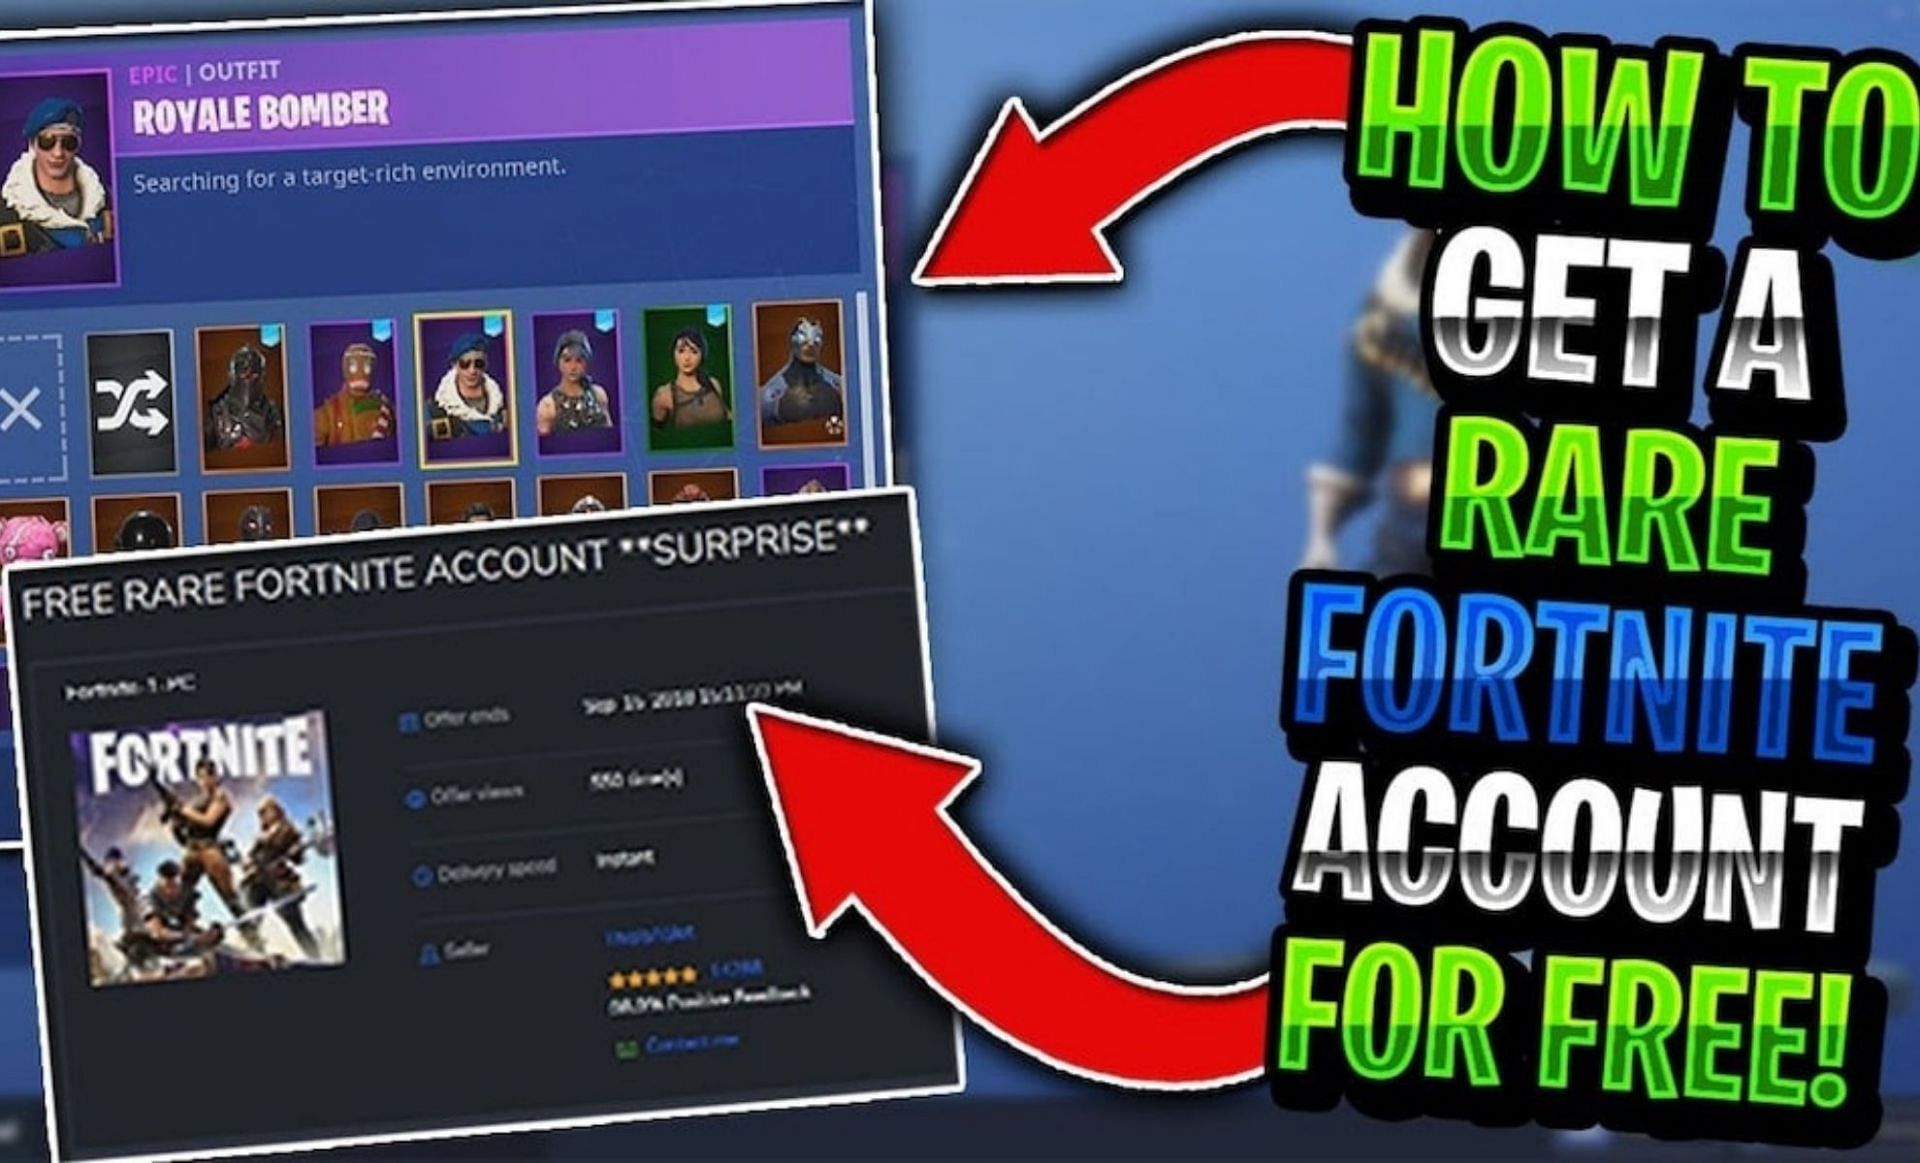 email and password generator fortnite